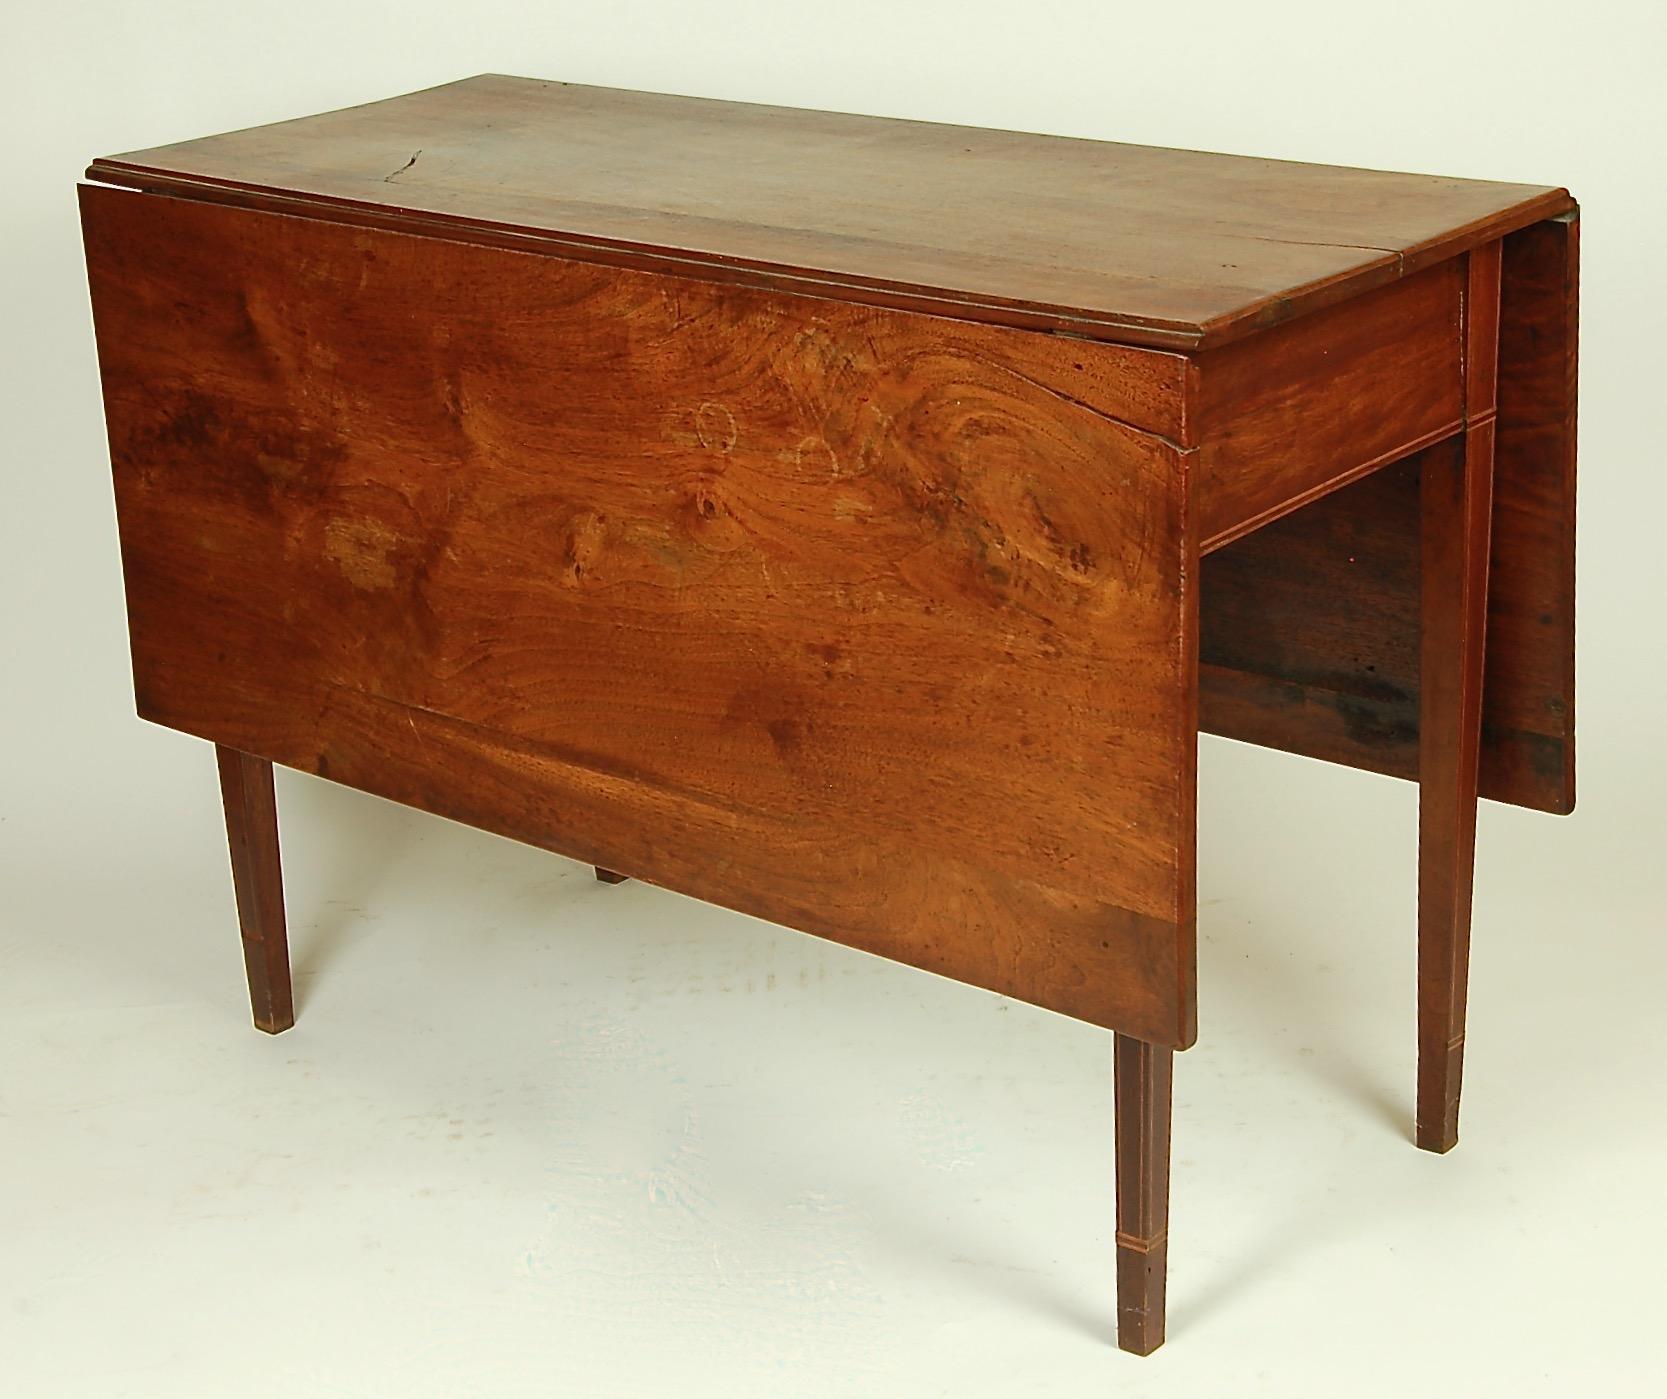 Dining or drop-leaf table